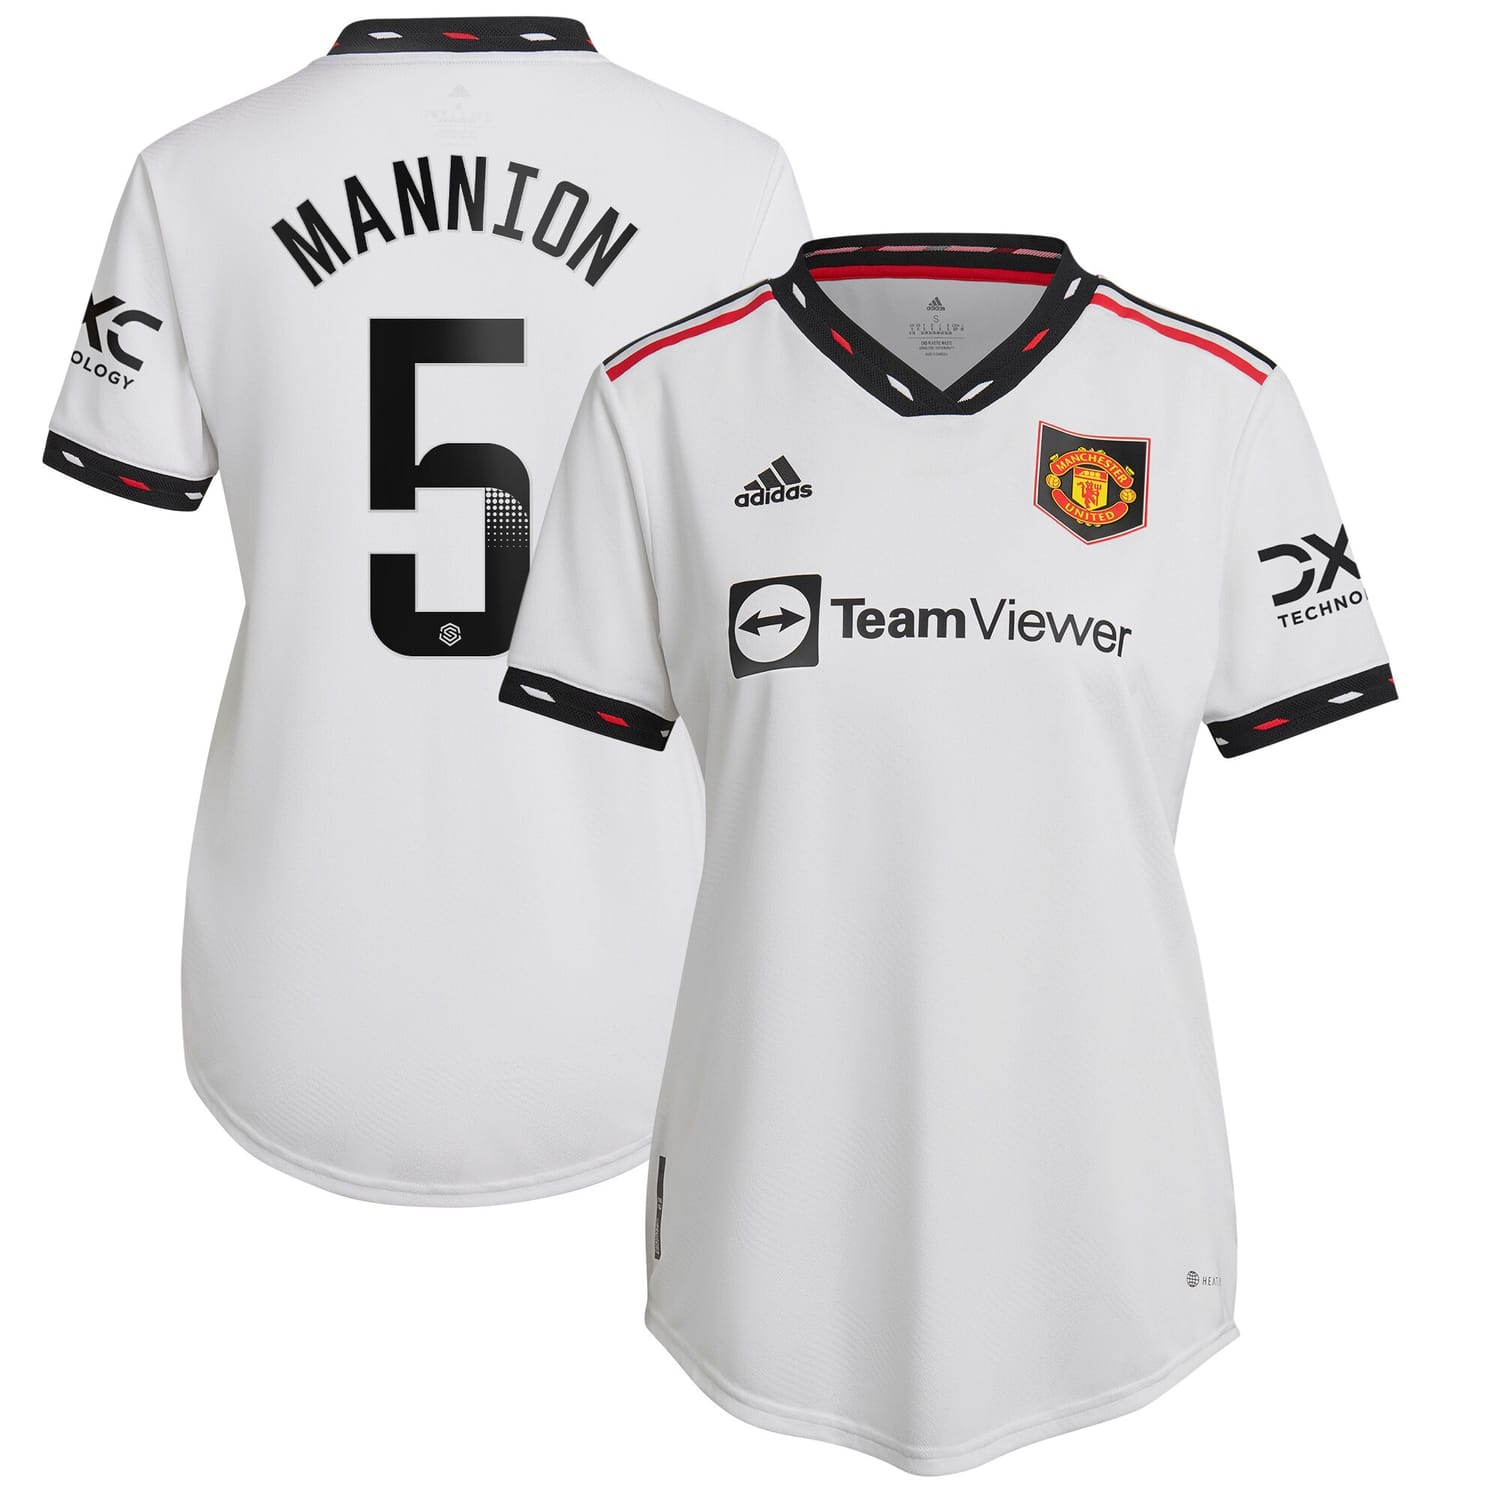 Premier League Manchester United Away WSL Authentic Jersey Shirt 2022-23 player Aoife Mannion 5 printing for Women